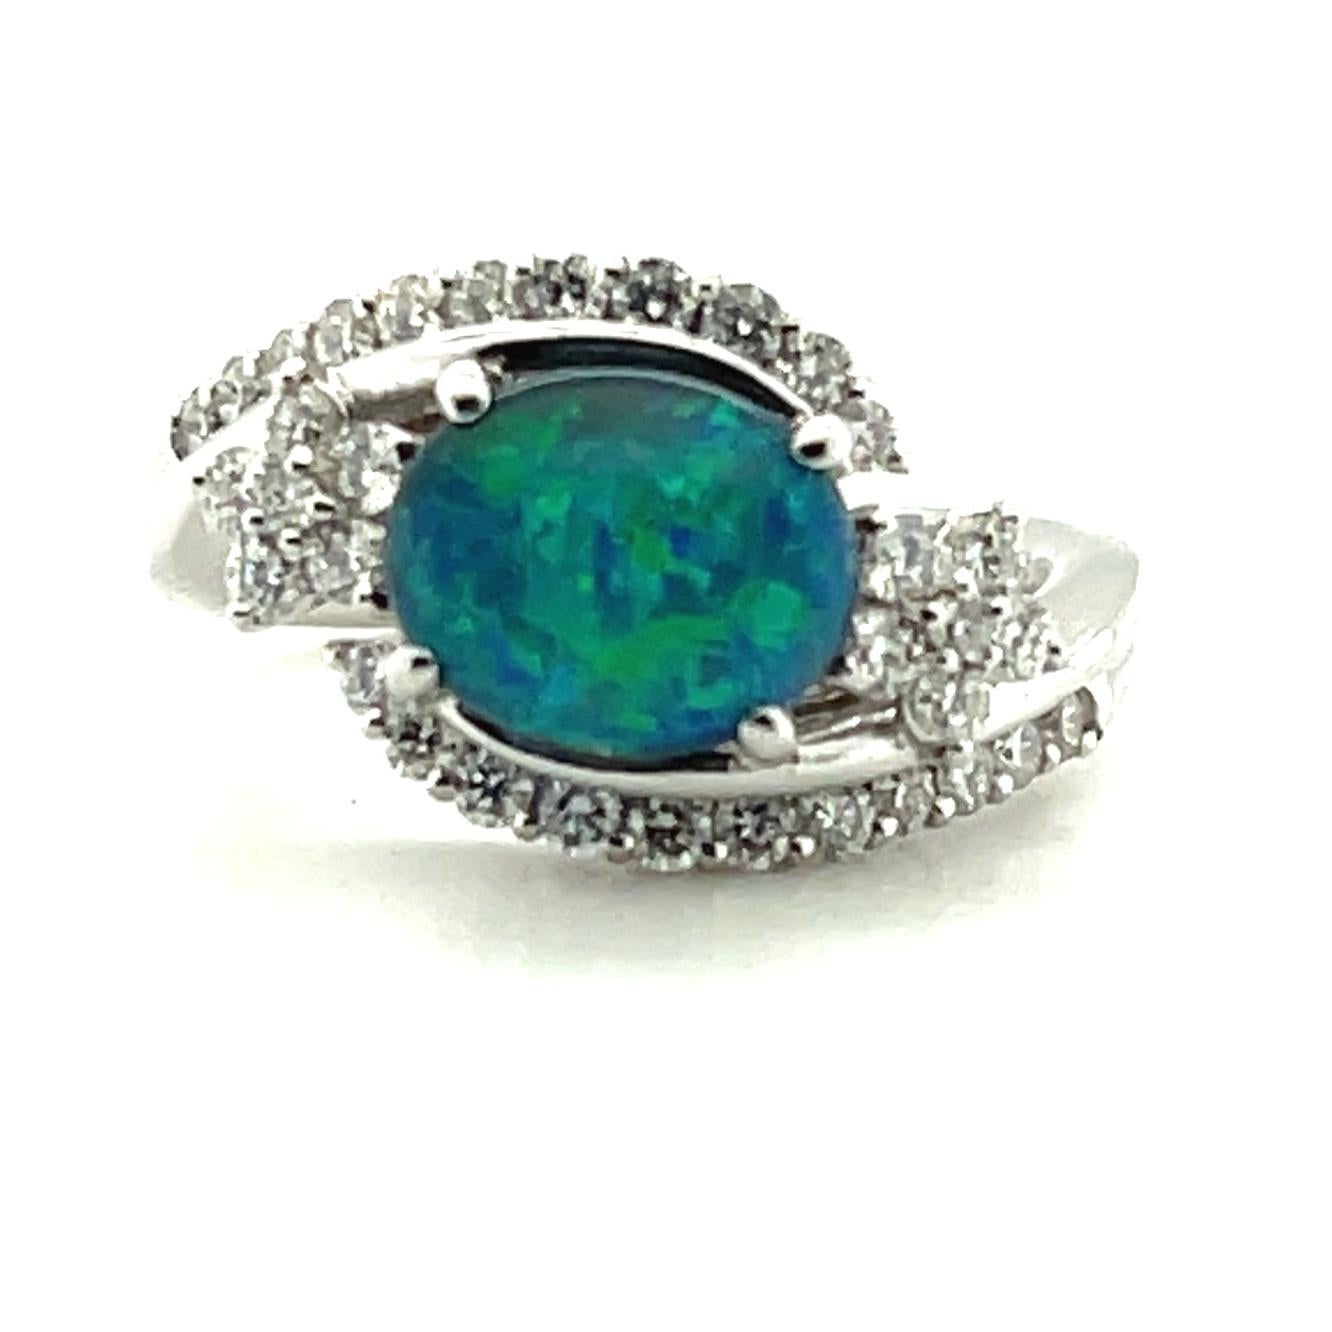 This gorgeous cocktail ring features a stunning 1.28 carat black opal set in platinum with brilliant white diamonds. The opal is a bright and lively gem with strong play-of-color that displays vibrant peacock blue and green flashes with a touch of